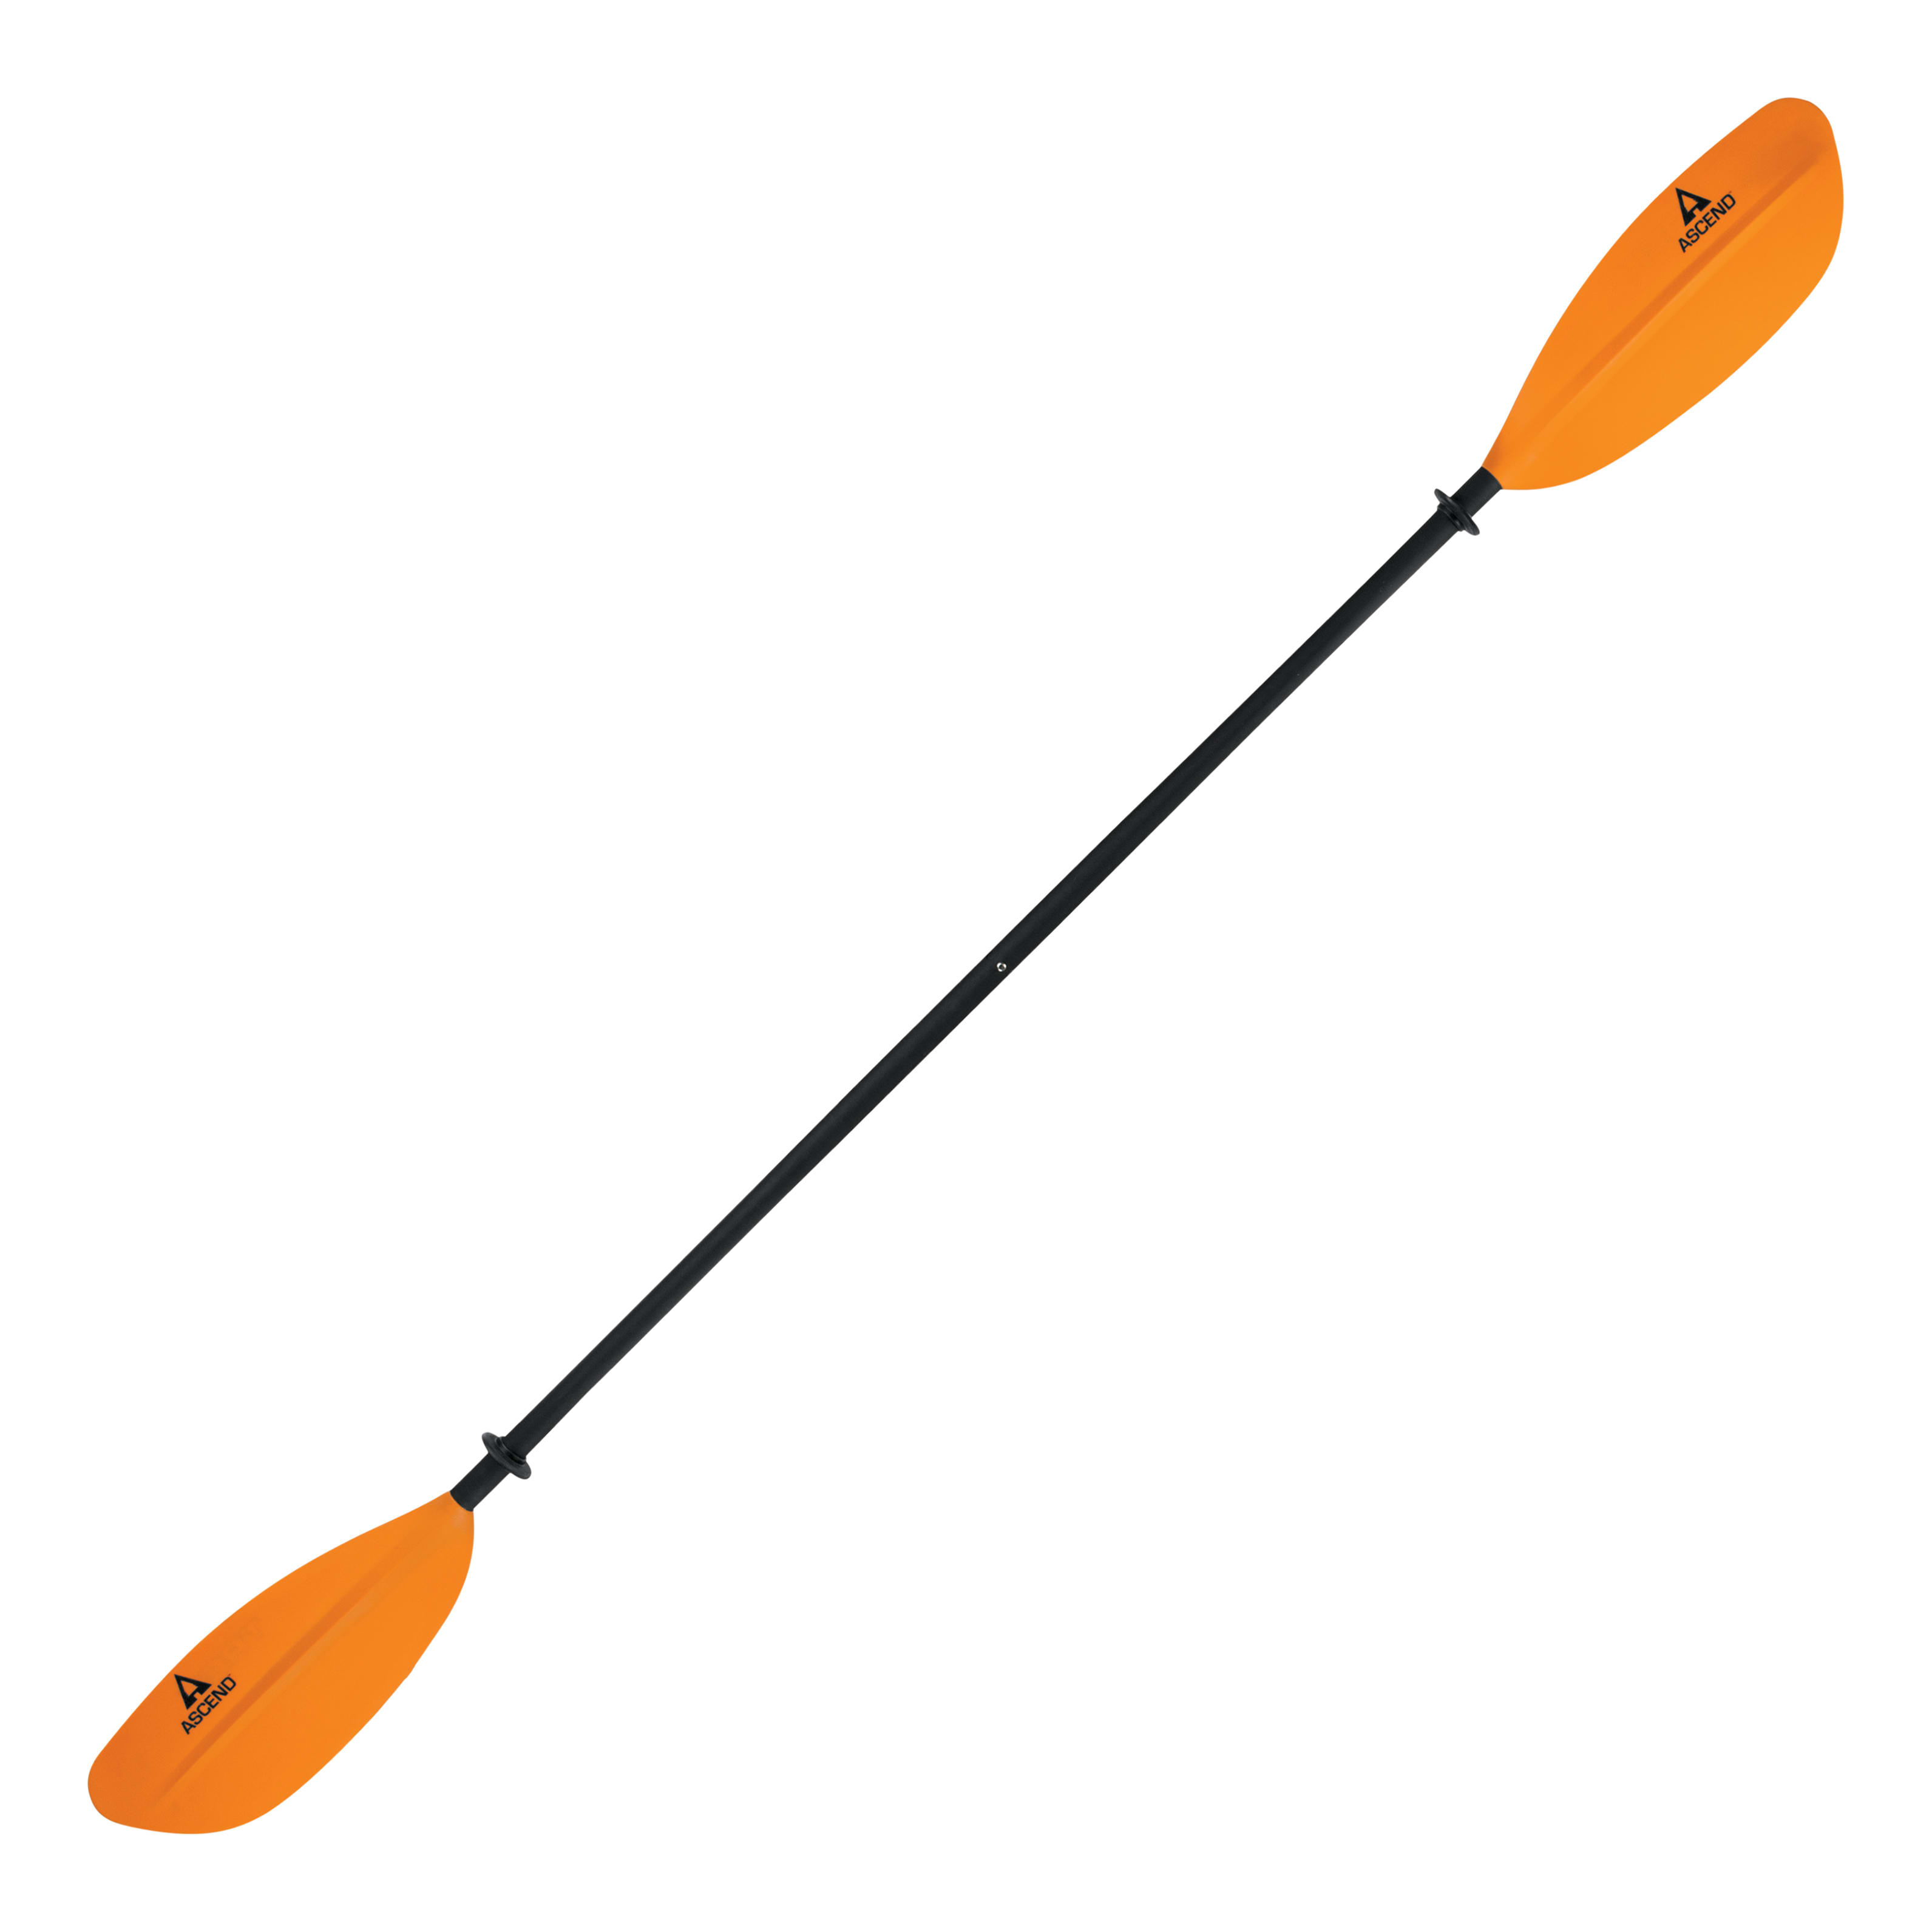 3' Deluxe Wooden Canoe Paddle by West Marine | Paddle & Water Sports at West Marine